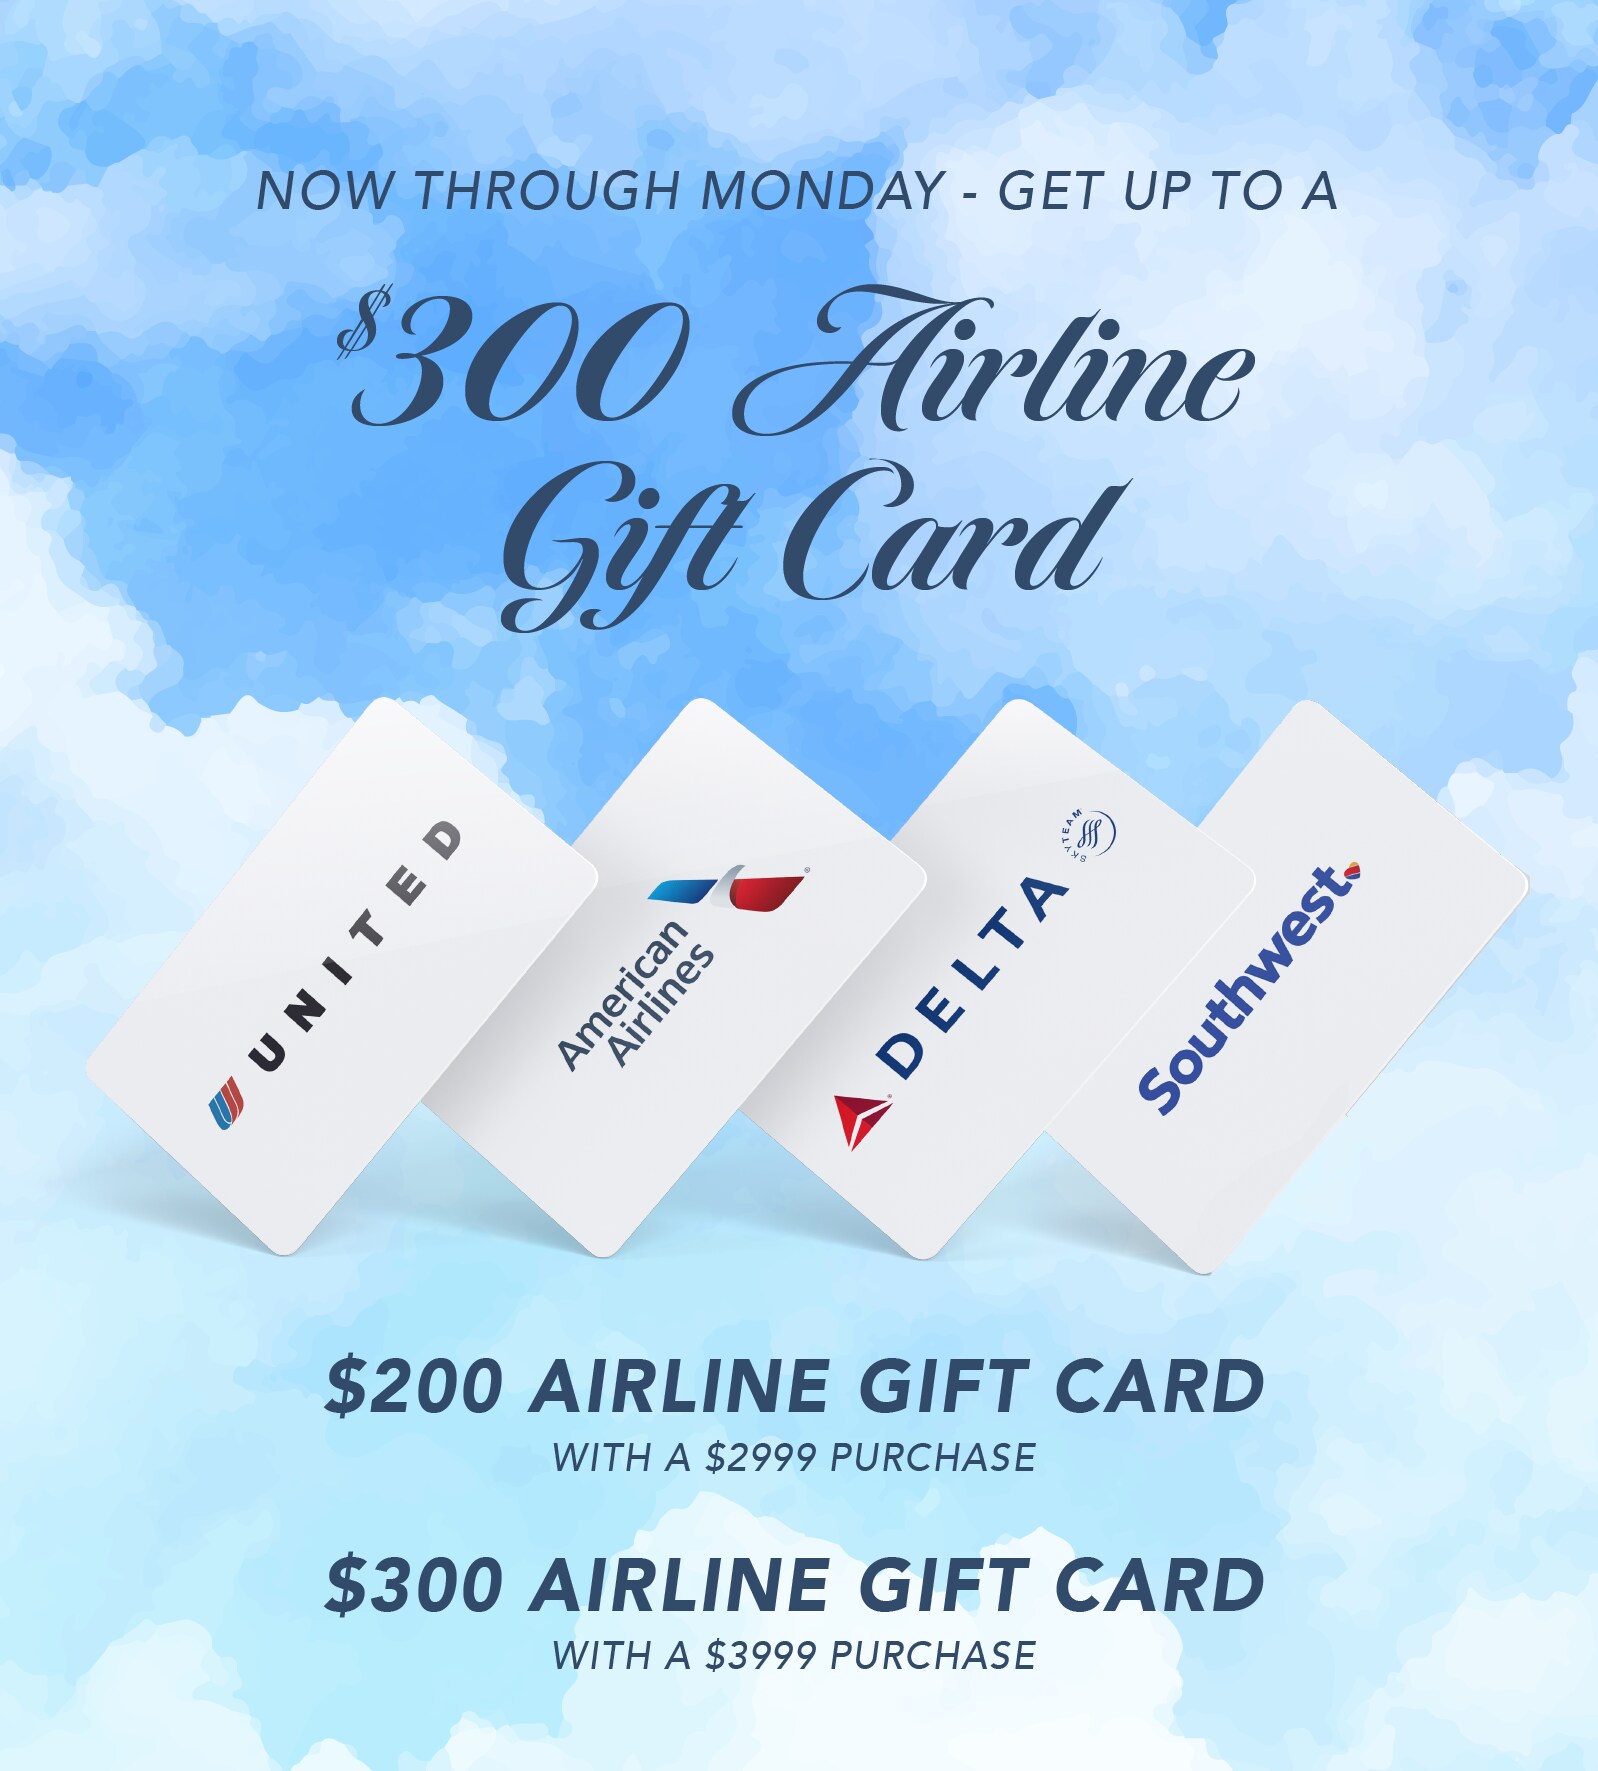 Presidents 4- Day Sale Airline Offer